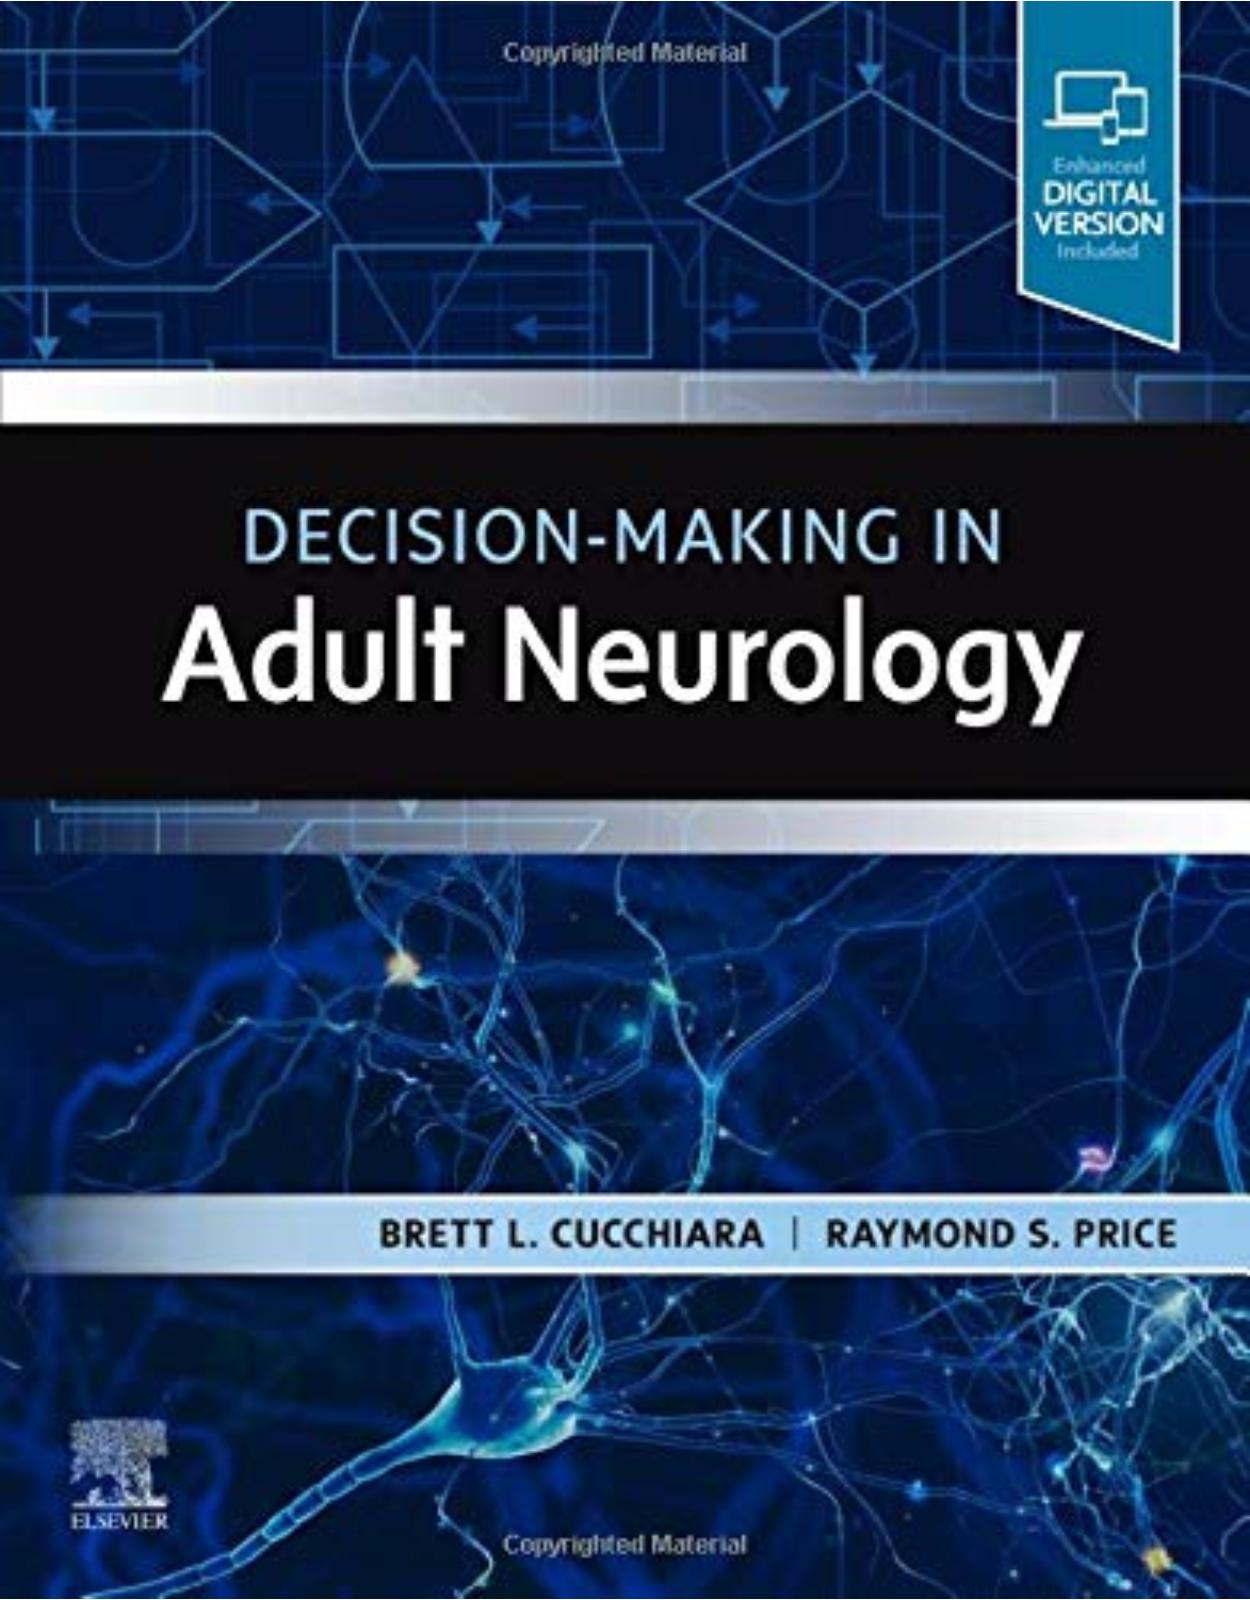 Decision-Making in Adult Neurology